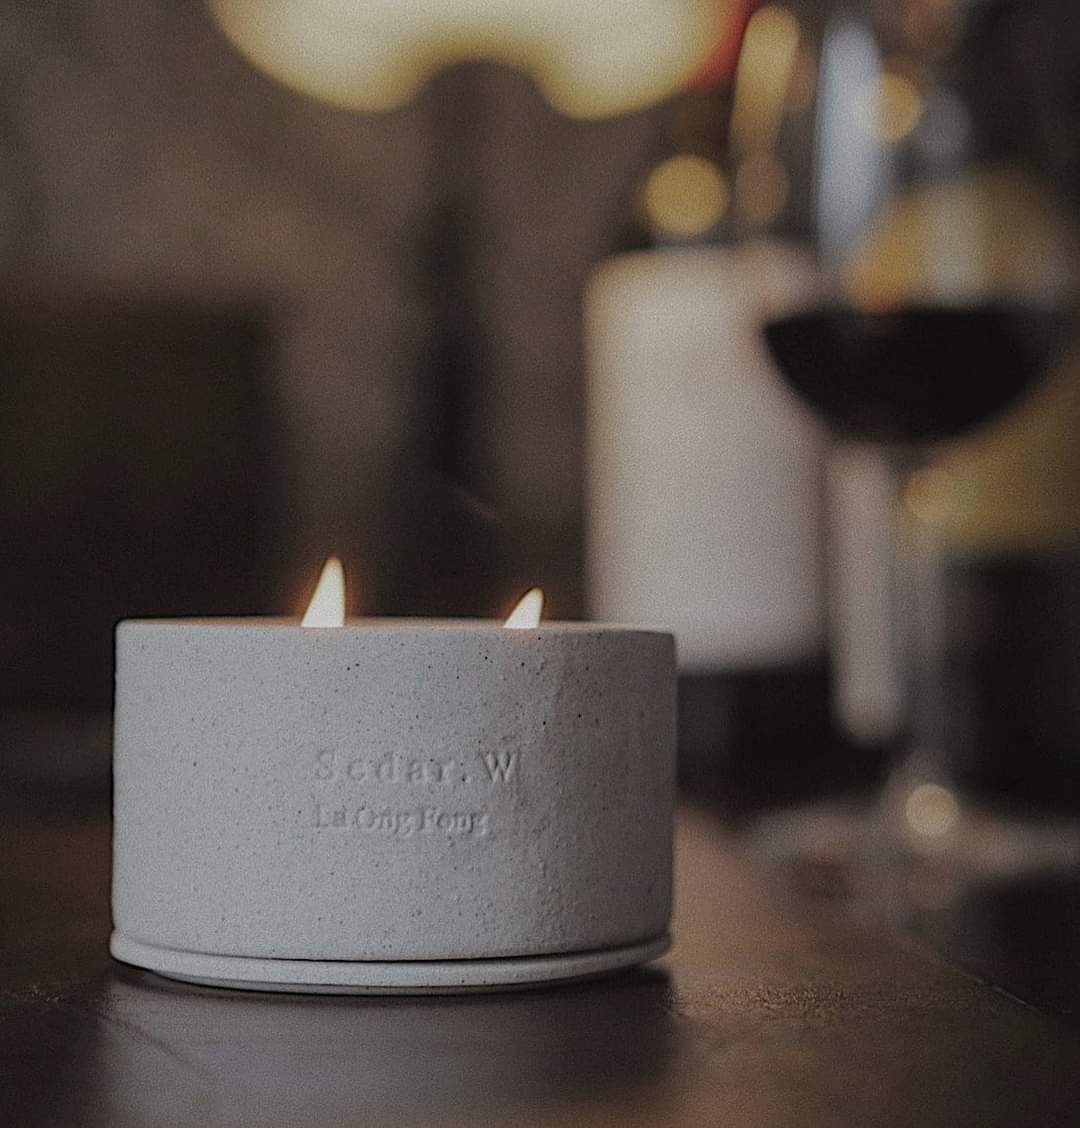 After a long day what can make you happy... A red wine, soft music and yourself.... It is during that moment of relax that it is good to light up your soul with a light candle.

#sedarw #soycandle #aromascent #lightcandle #candlescent #ceramiccandle #laongfong #fridaynight